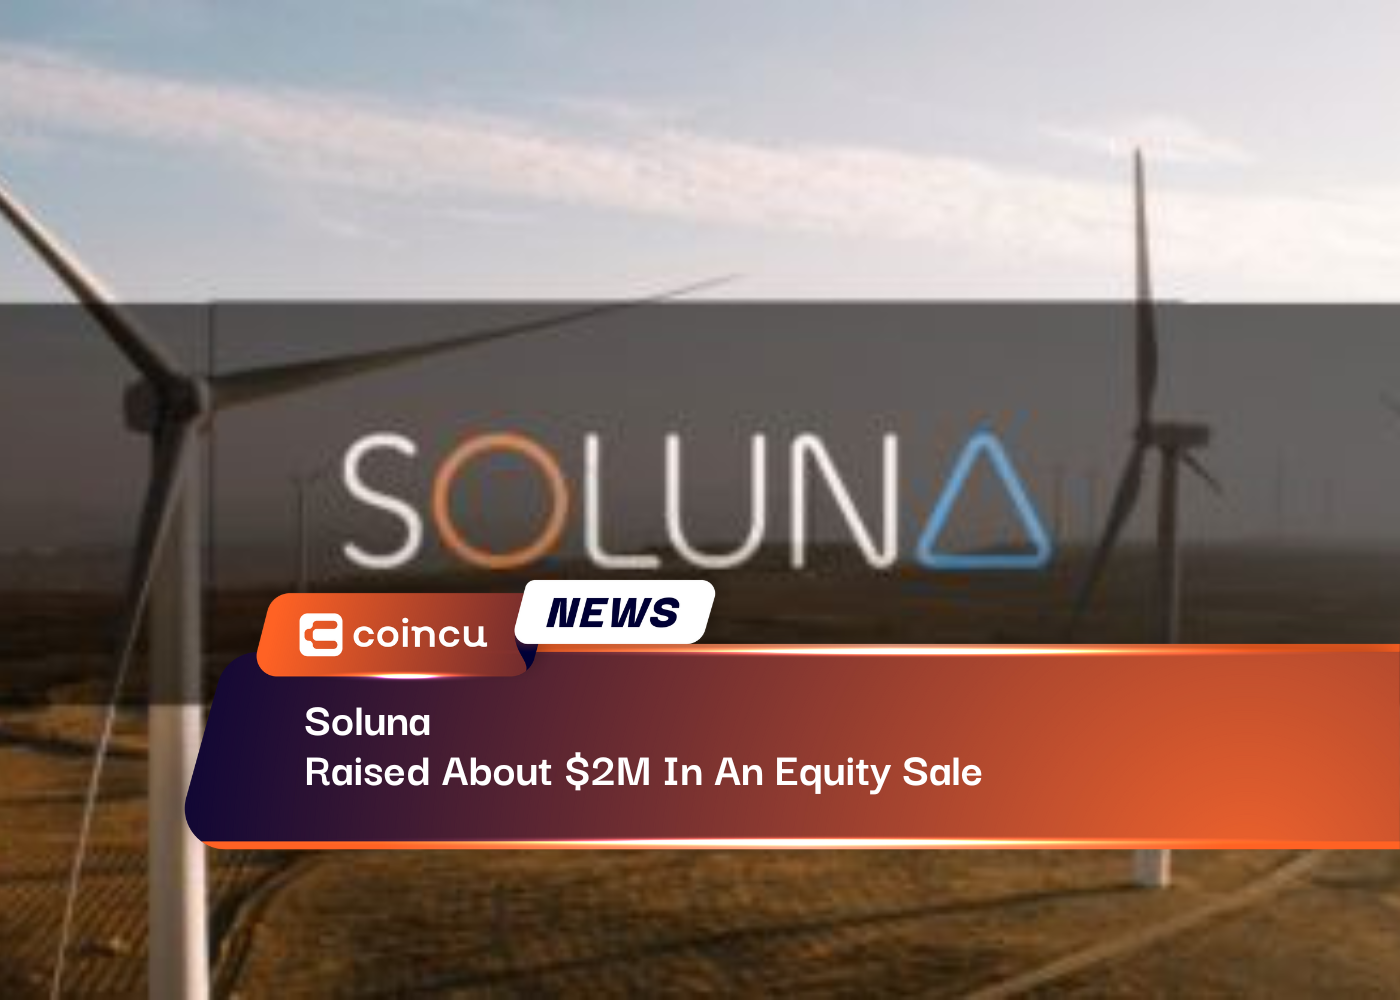 Soluna Raised About $2M In An Equity Sale